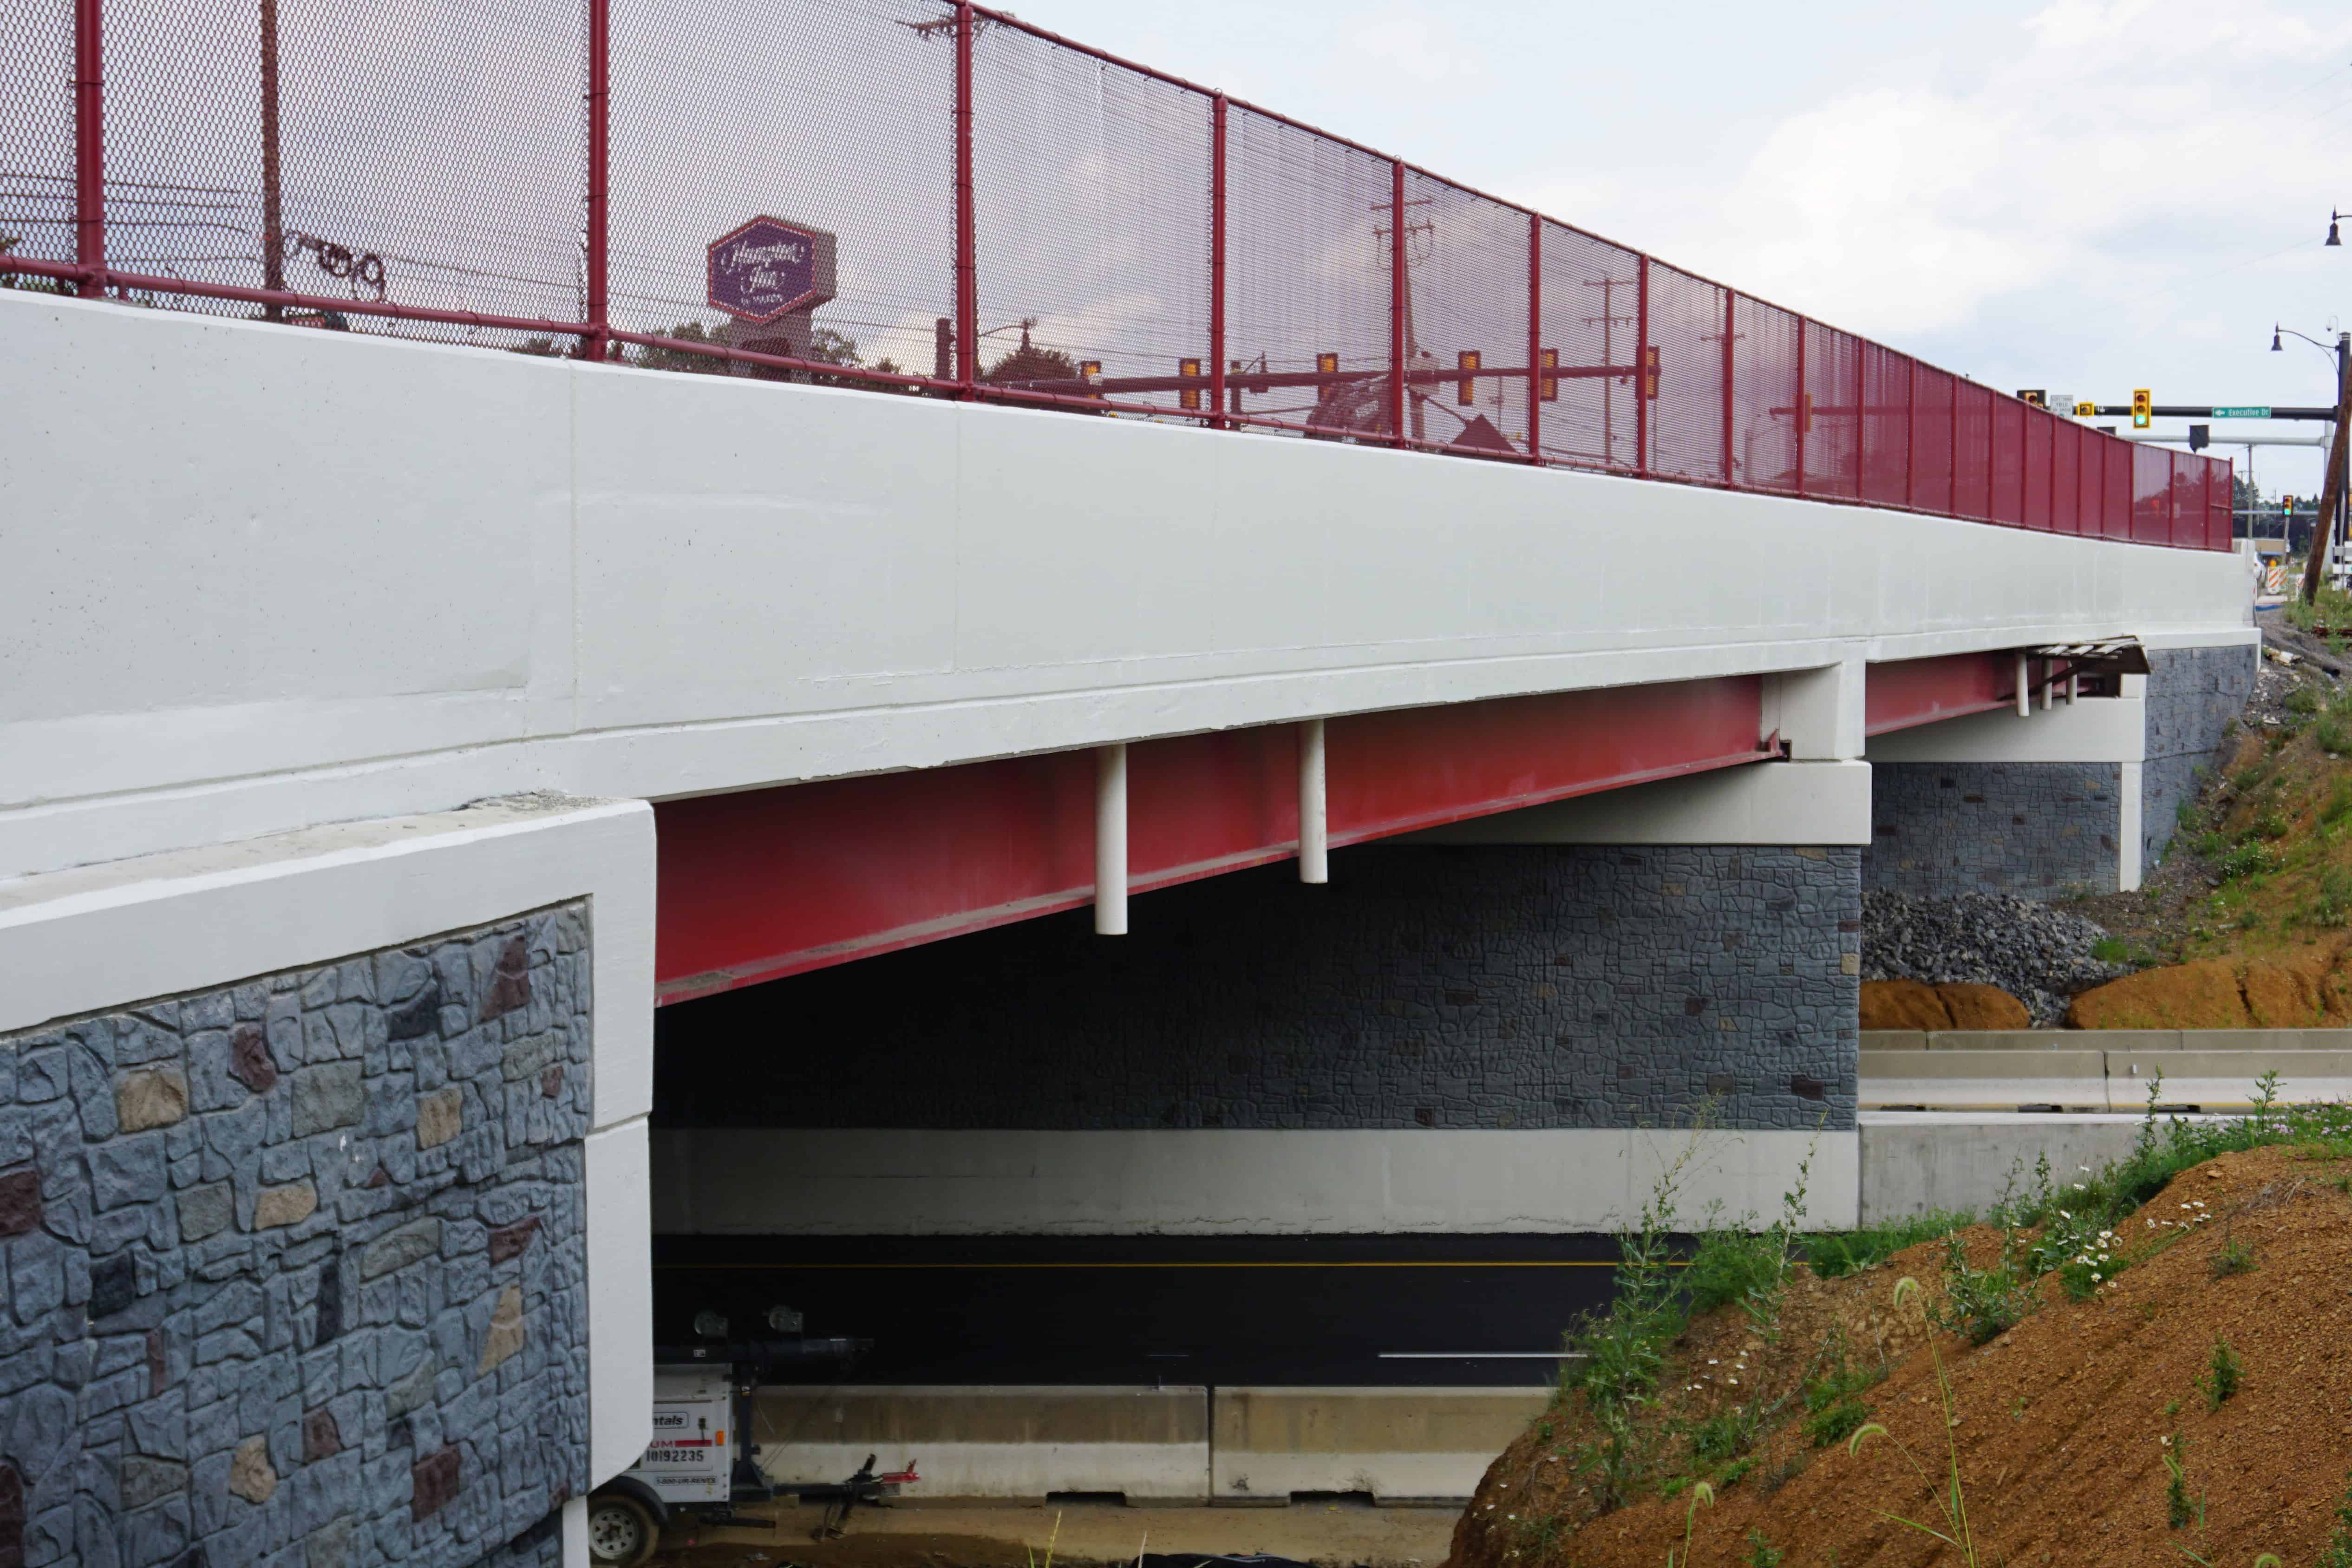 A concrete bridge with red steel beams and fencing stretches across two roadways.